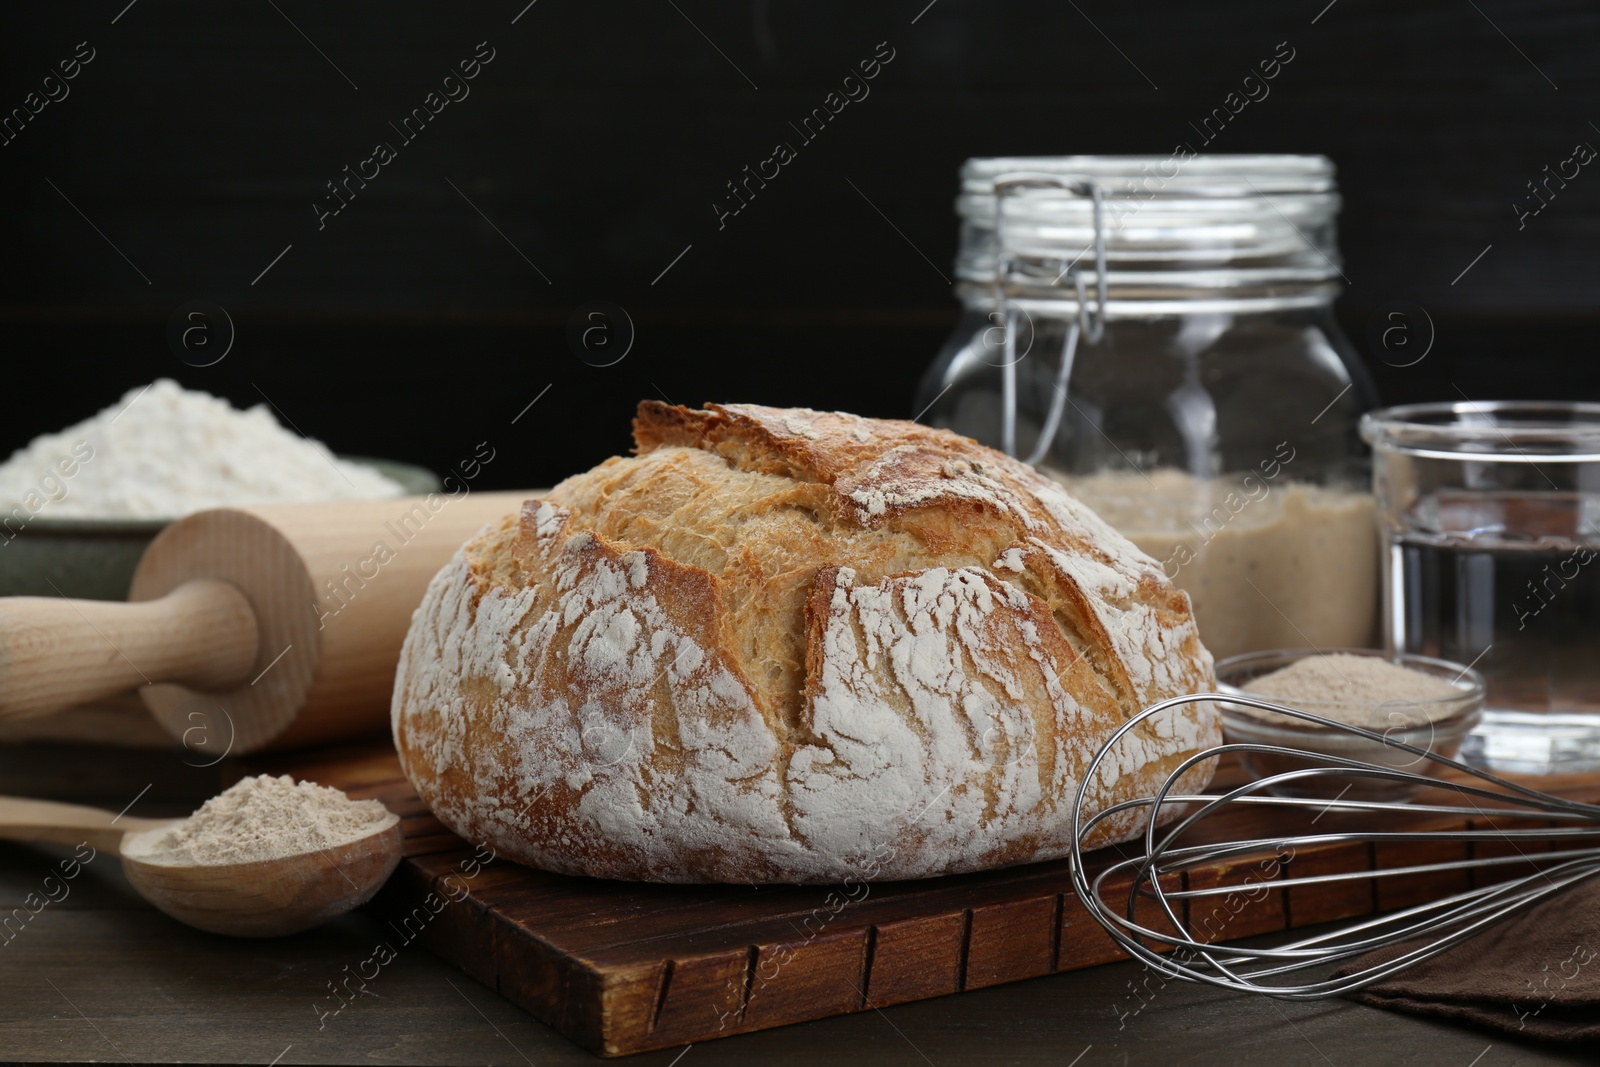 Photo of Freshly baked sourdough bread and ingredients on wooden table